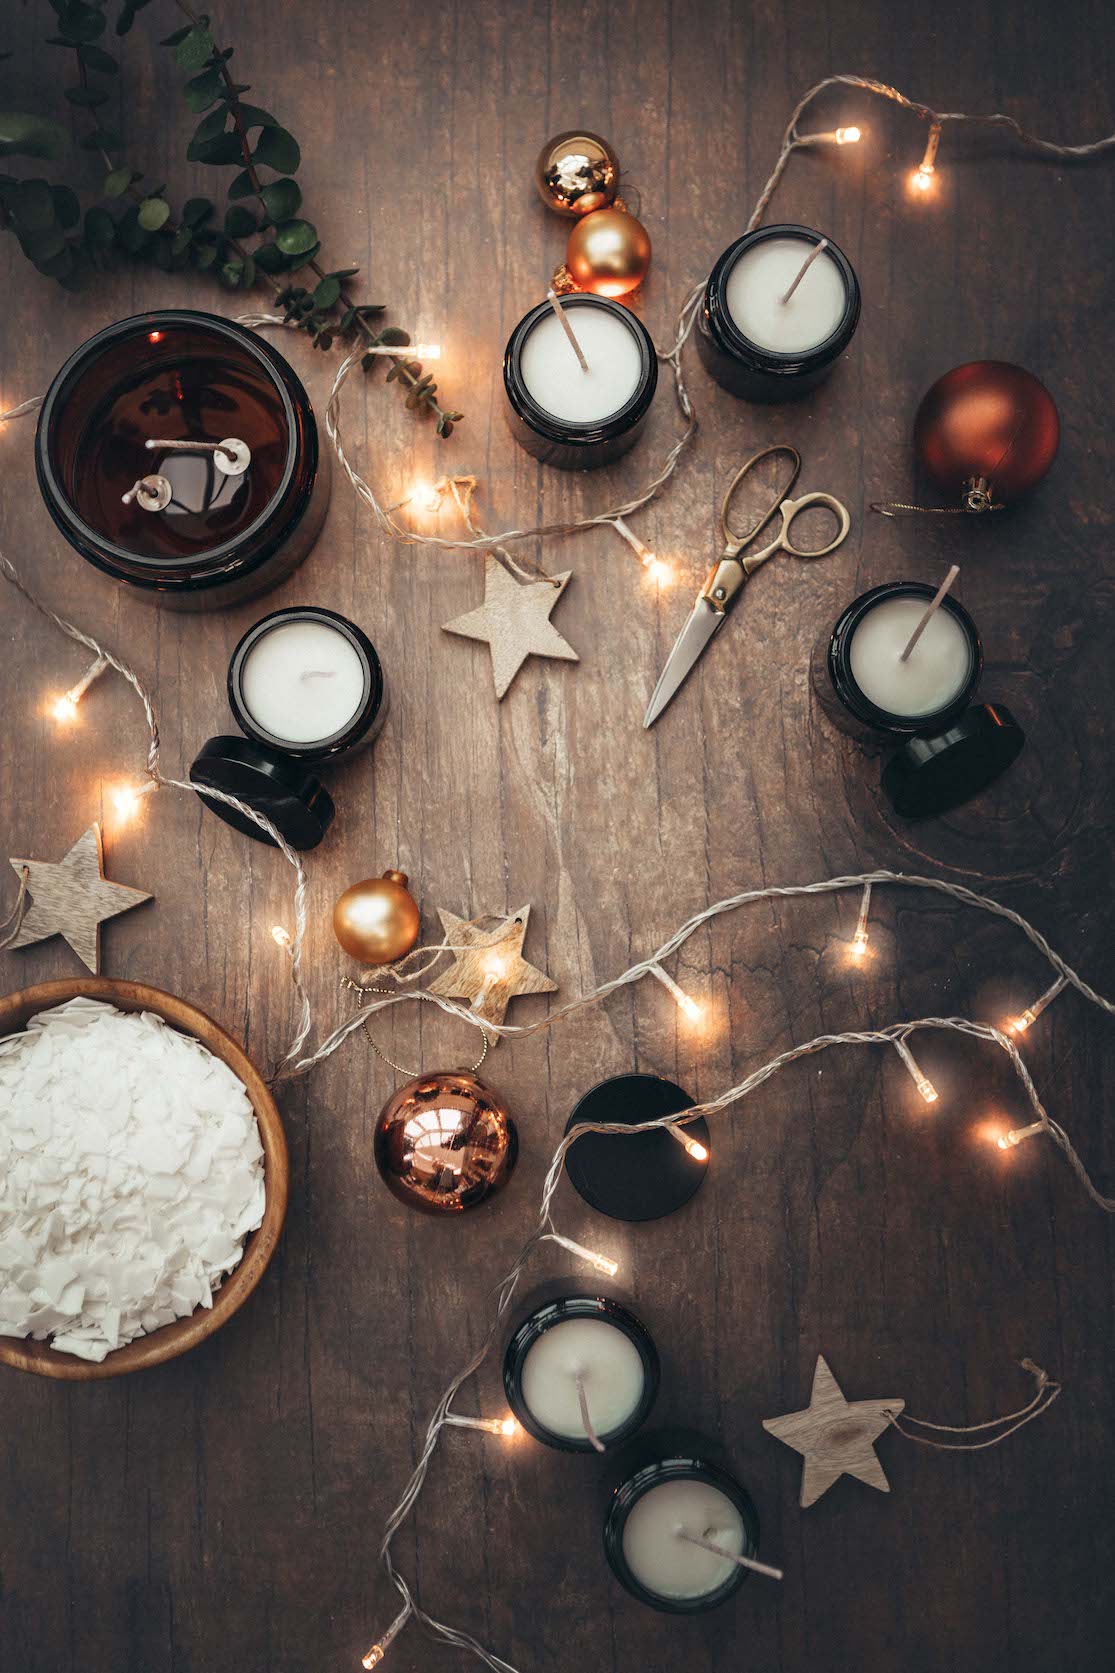 Homemade Gingerbread soy candles by Break The Loop